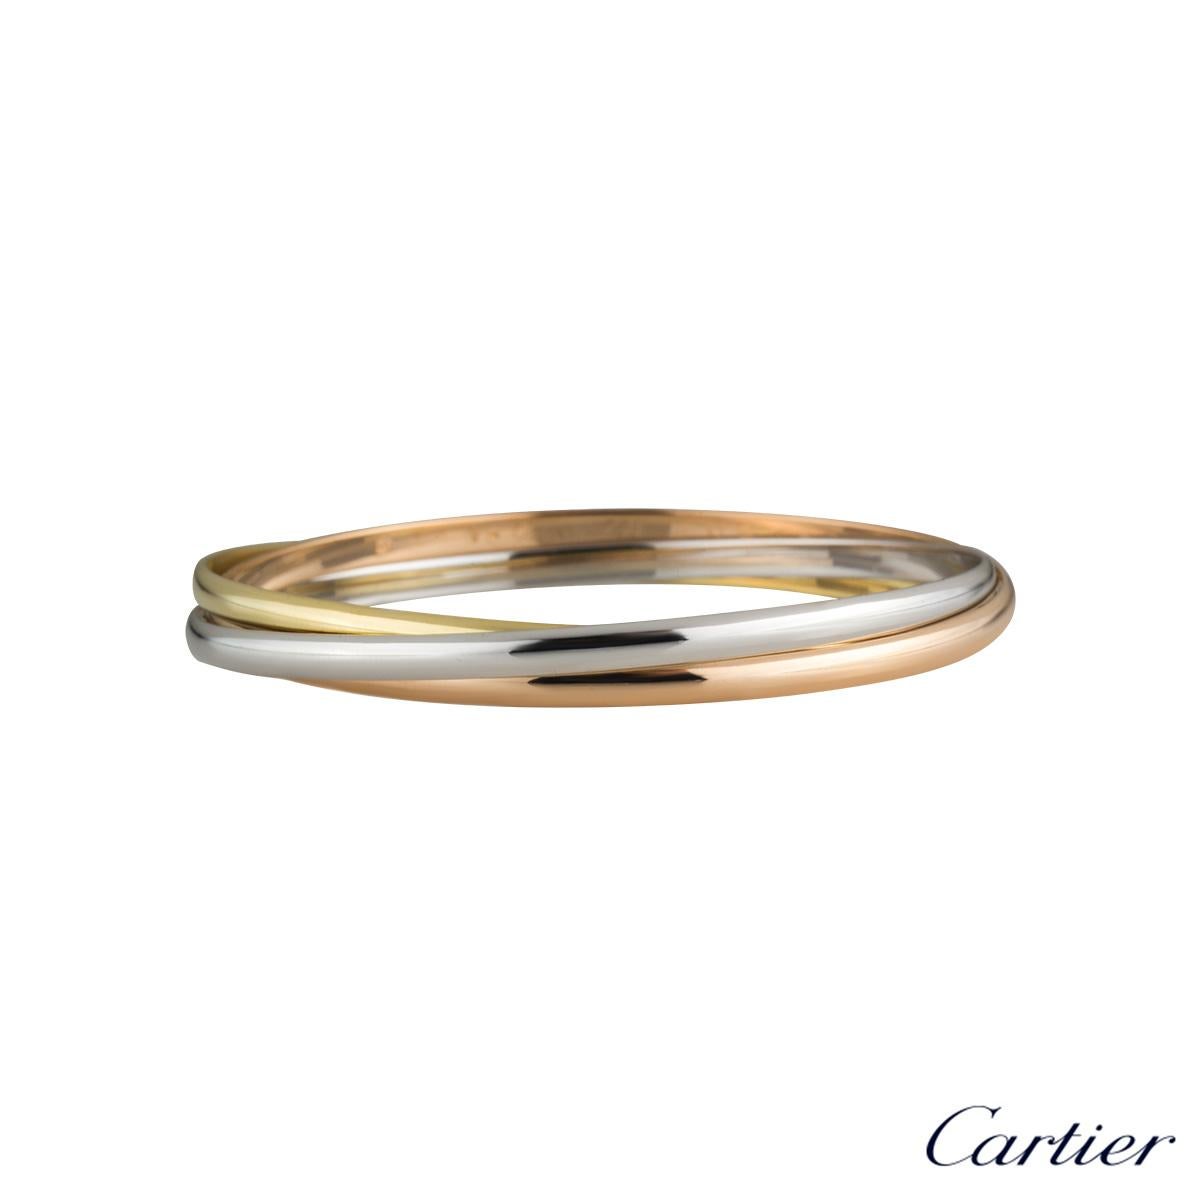 An iconic 18k tri-colour gold Cartier bracelet from the Trinity de Cartier collection. The bracelet is made up of three intertwined 18k rose, white and yellow gold 3.2mm bands. The bracelet fits a wrist size of up to 20cm and has a gross weight of